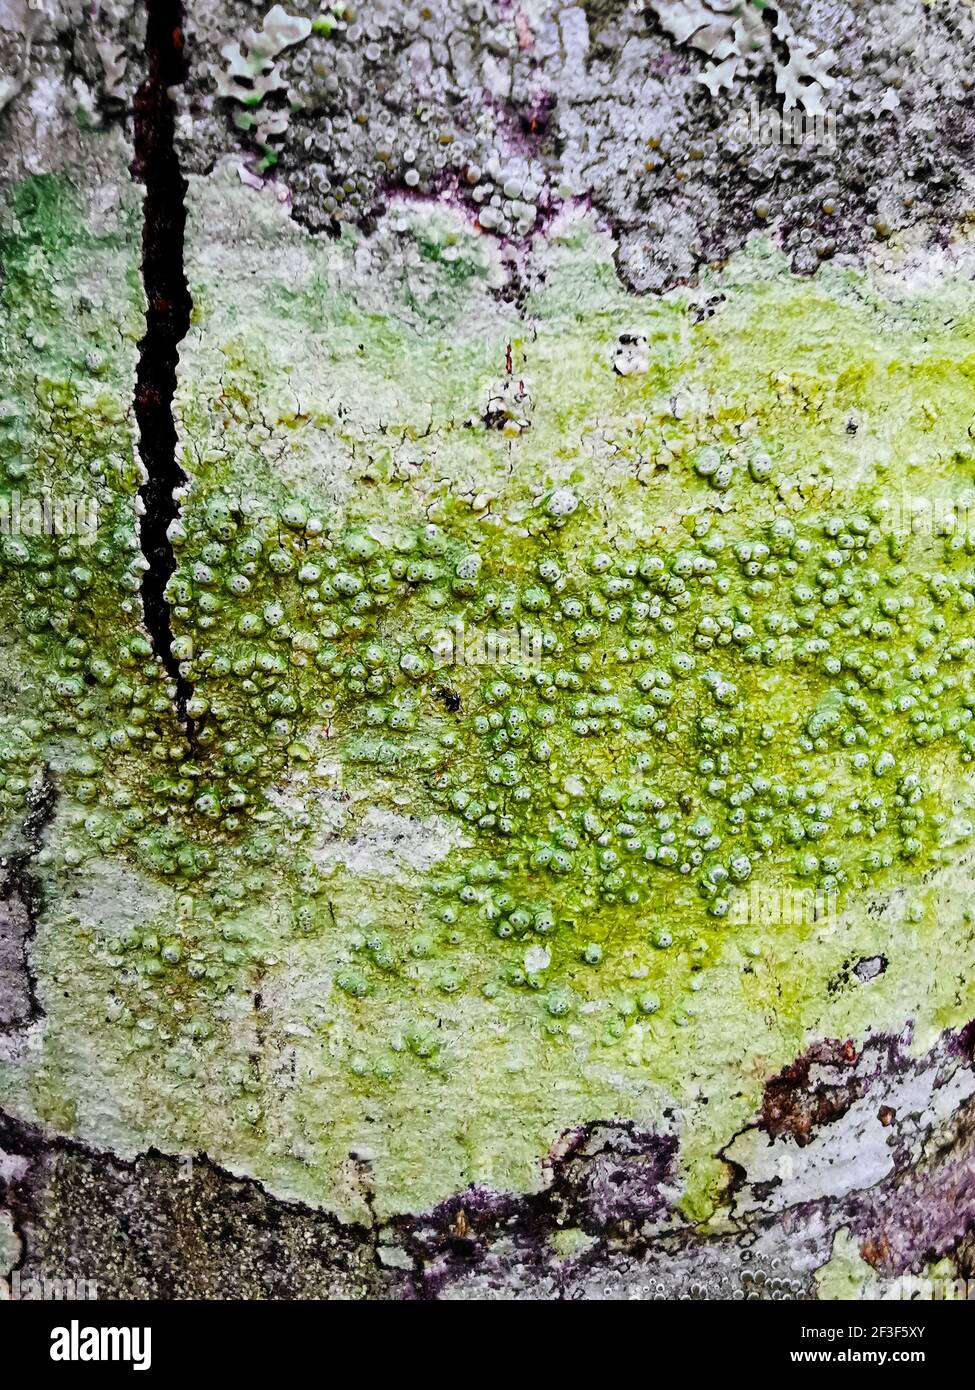 A closeup of wart lichens on the wood, Pertusaria warty crustose lichens Stock Photo